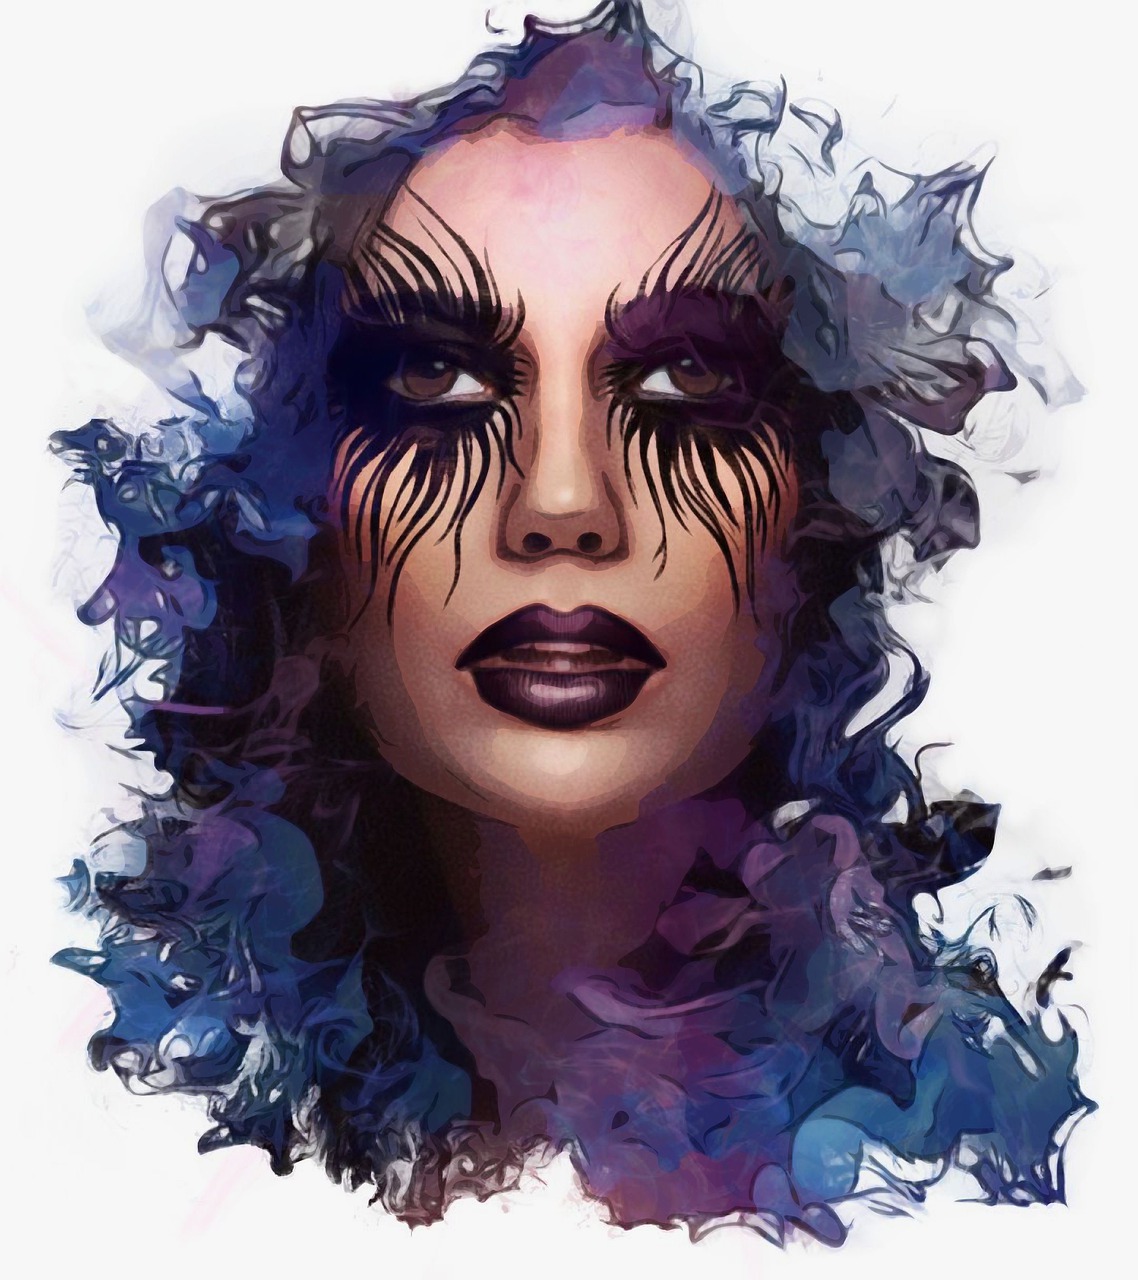 a digital painting of a woman's face, behance contest winner, gothic art, demon black blue purple, creative makeup, watercolor painting style, harpy woman